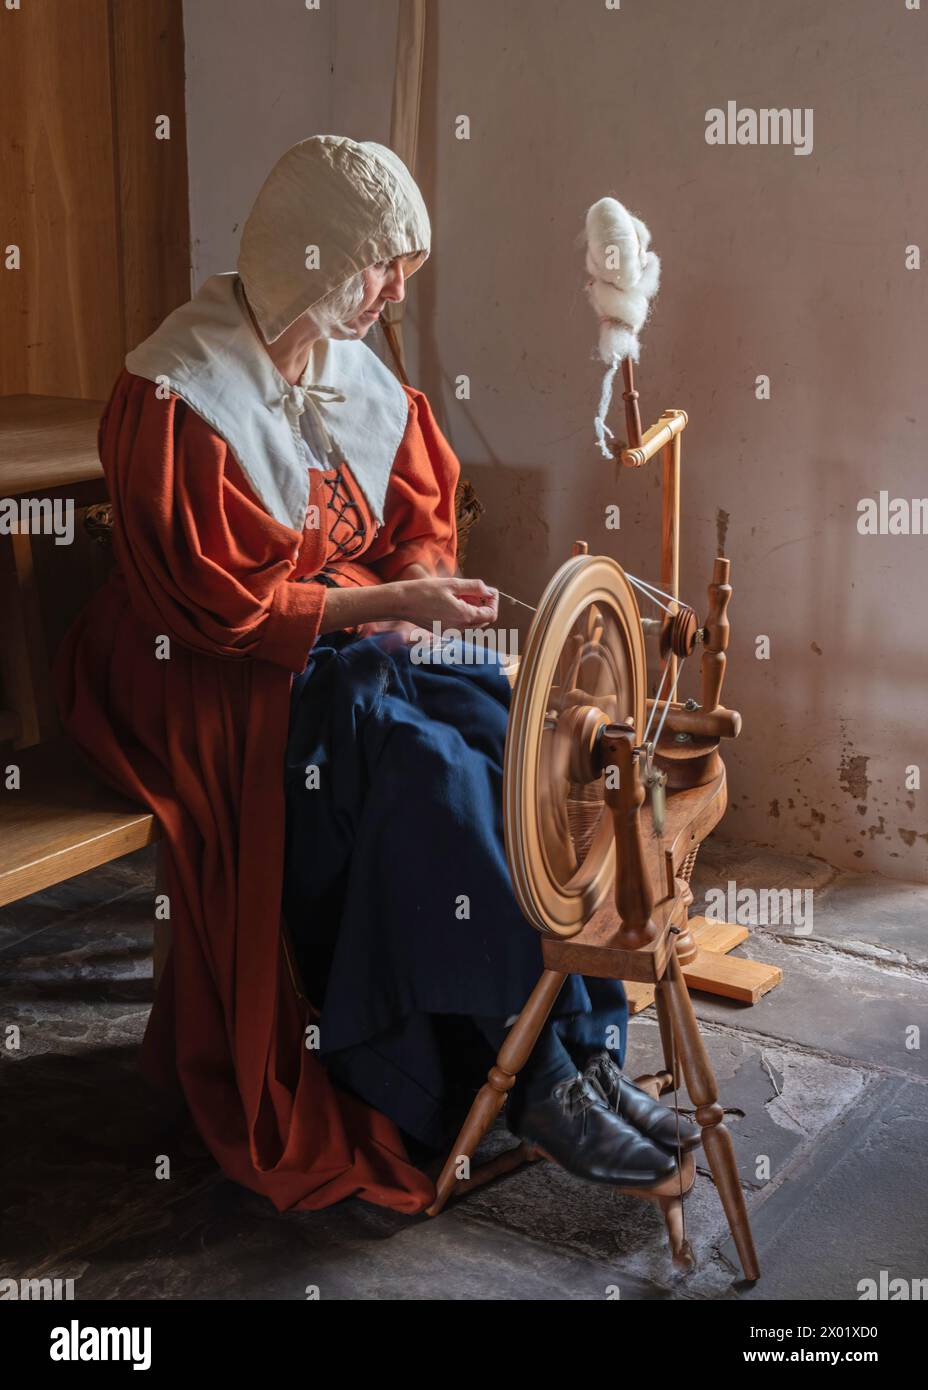 A maiden demonstrating the use of a spinning wheel at Tretower Court and Castle, Tretower, Powys, Wales, UK. Stock Photo